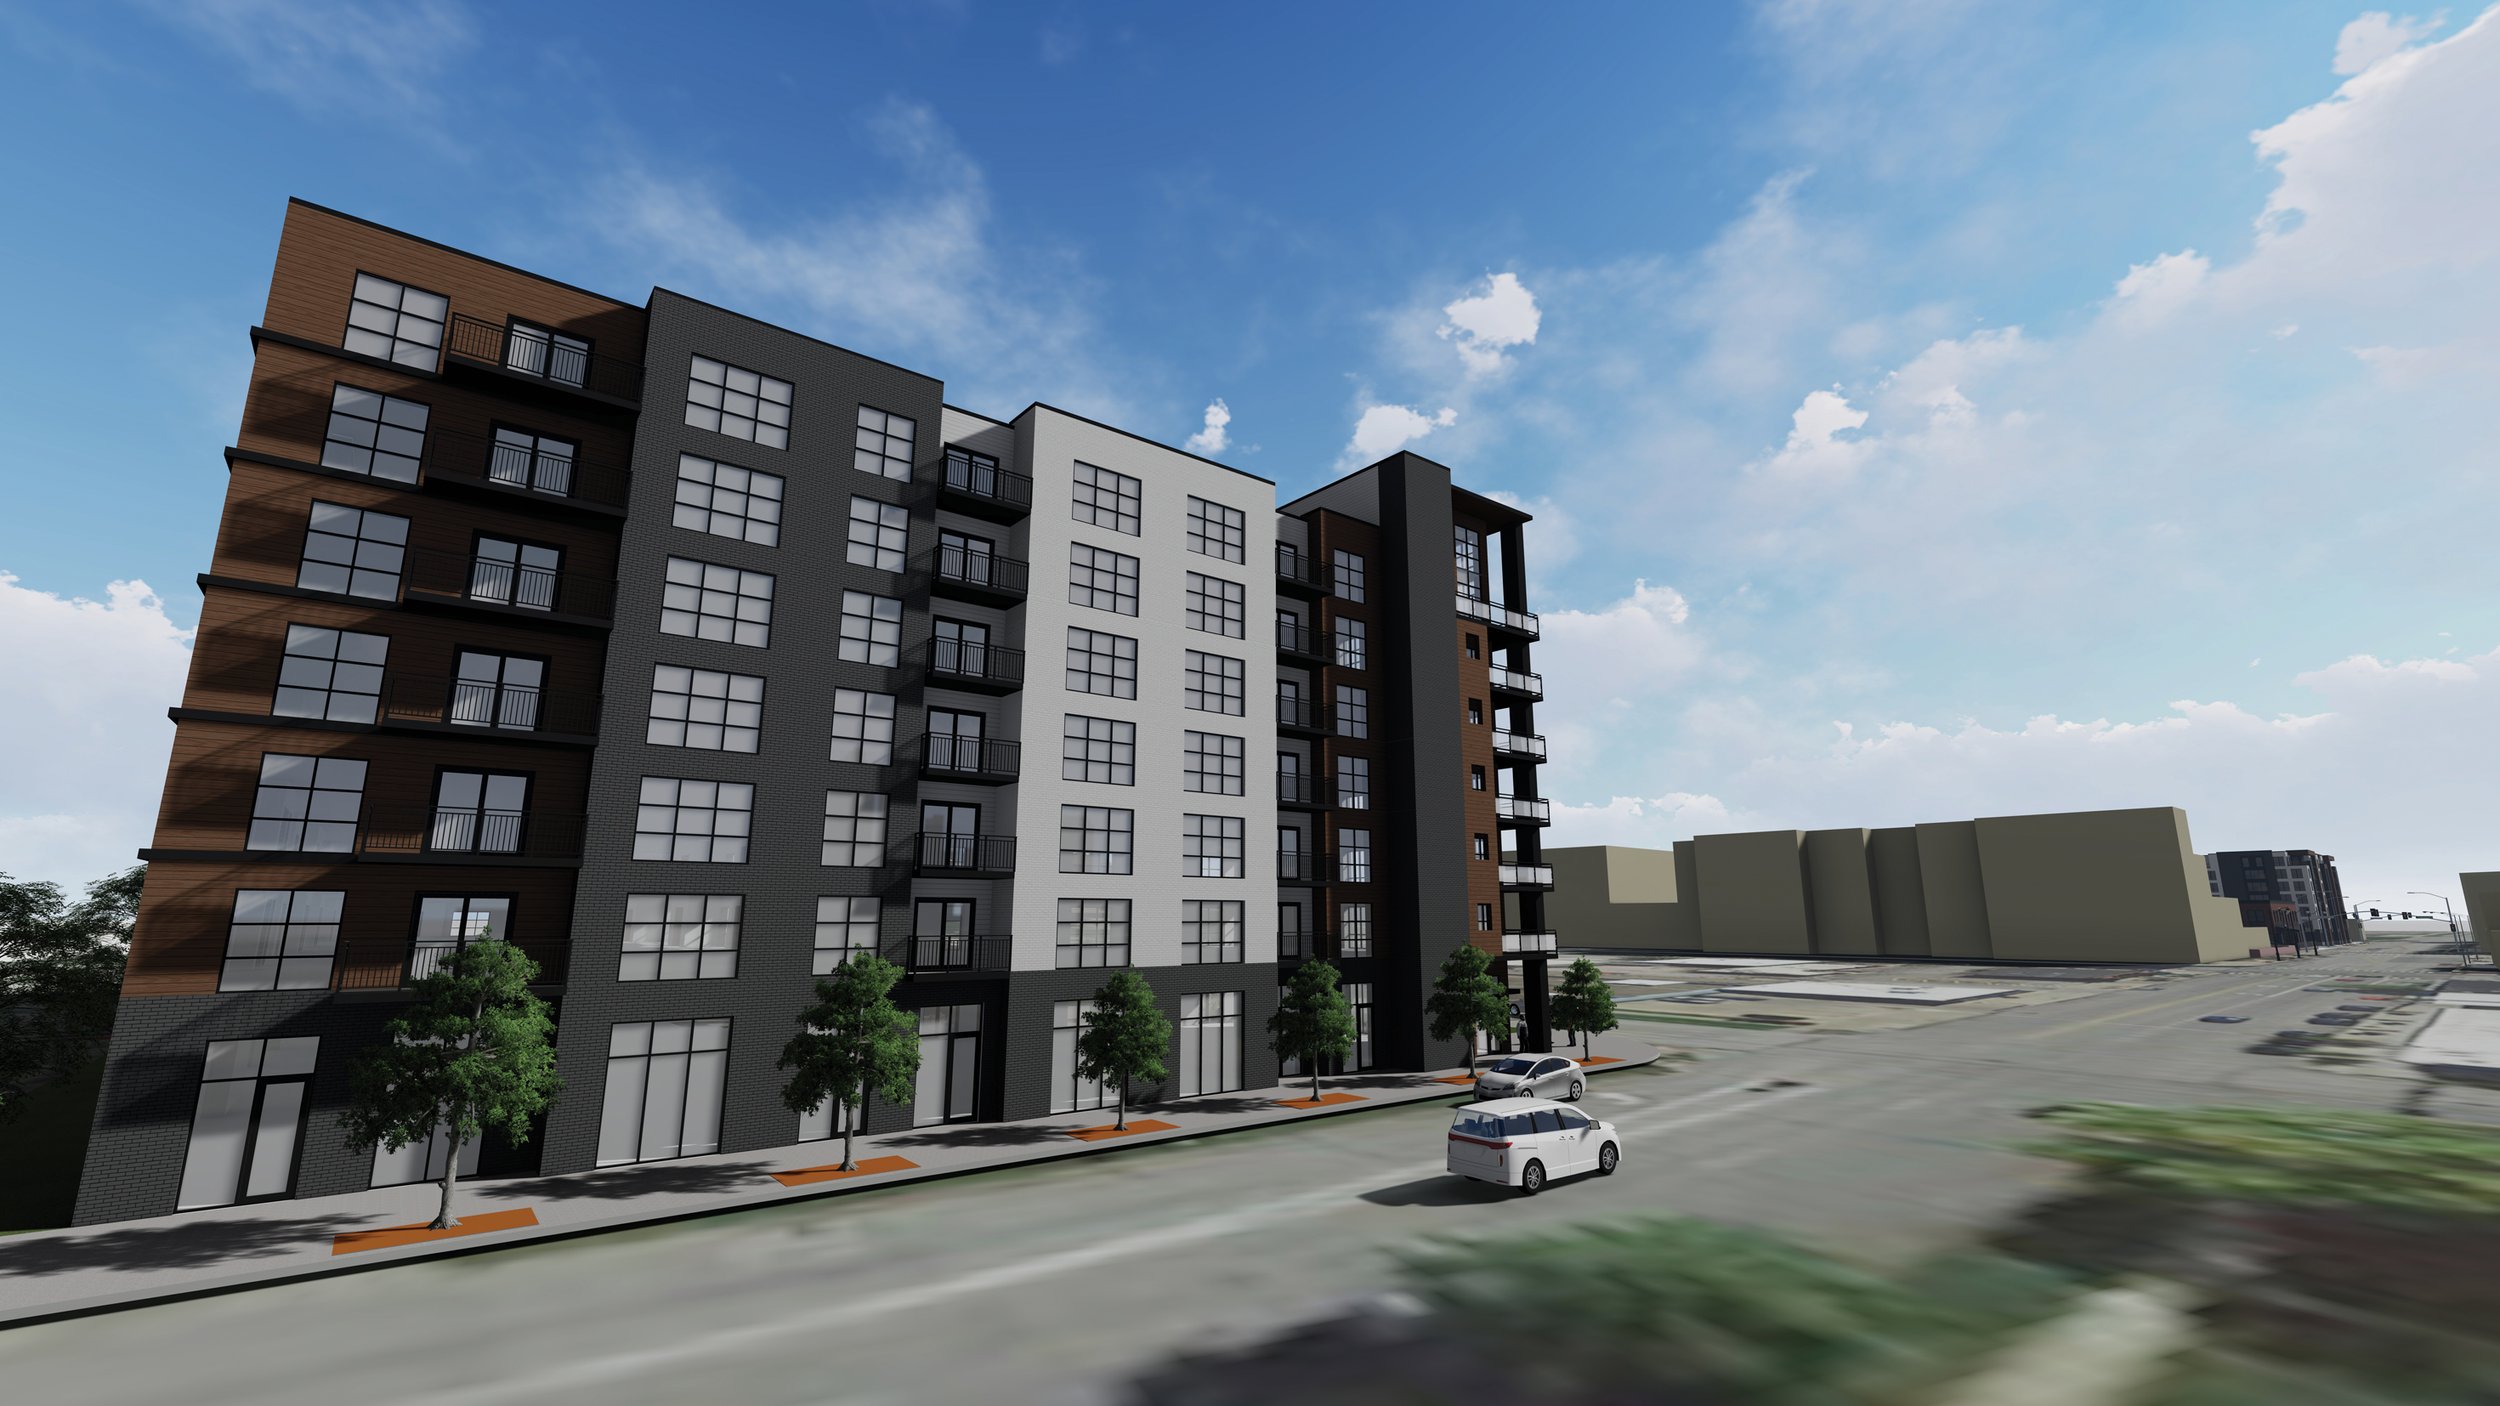  Heart of American Group is proposing the construction of a midrise mixed-use project at East Sixth and Des Moines streets in Des Moines. The U-shaped building would include 186 units, underground parking and a dog park. Apartments on the west side o